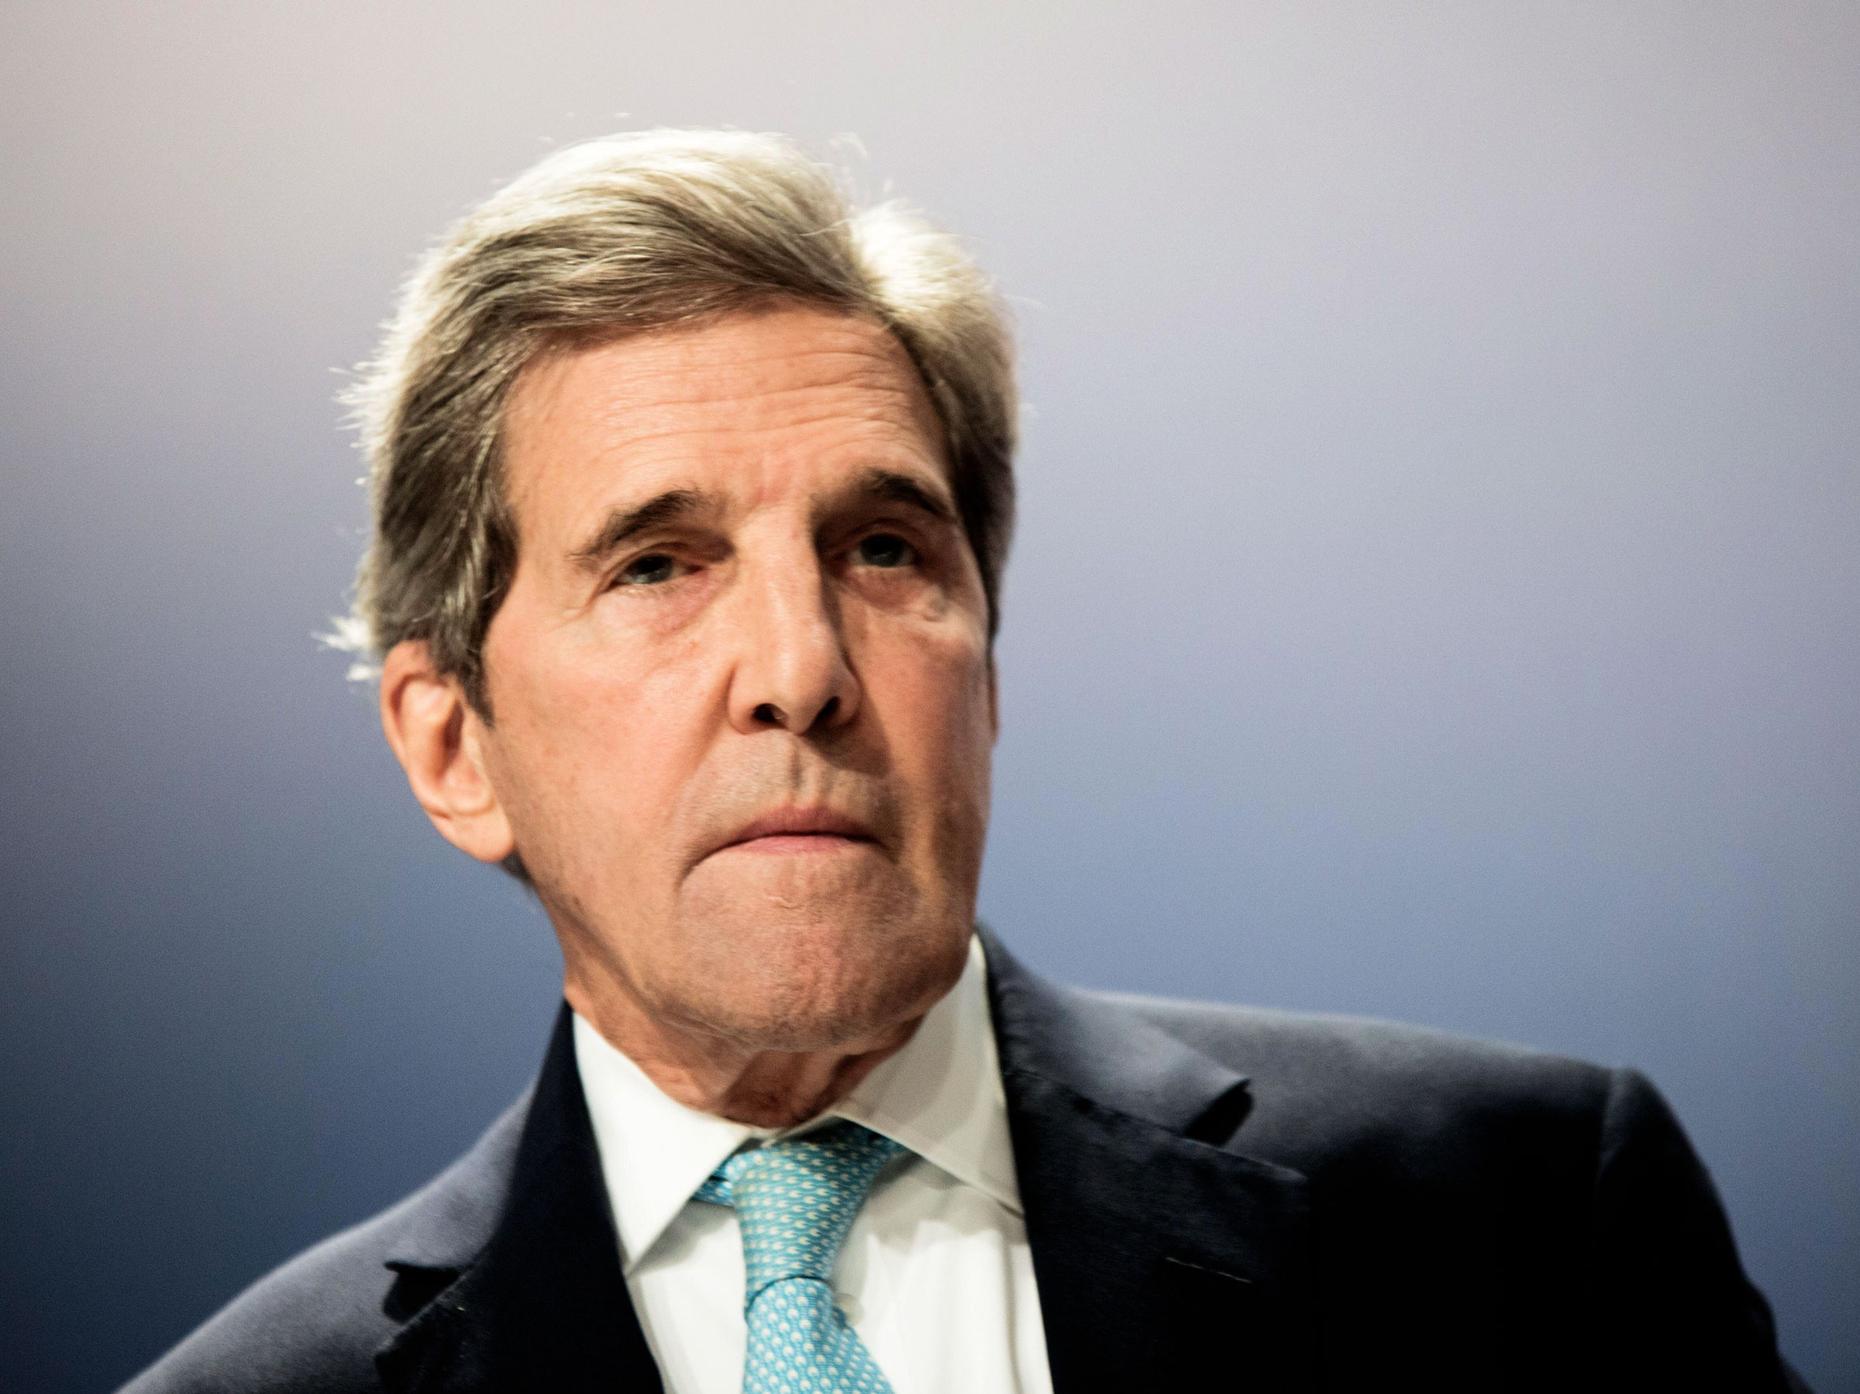 wapo-does-john-kerry-have-a-brian-williams-problem-breitbart